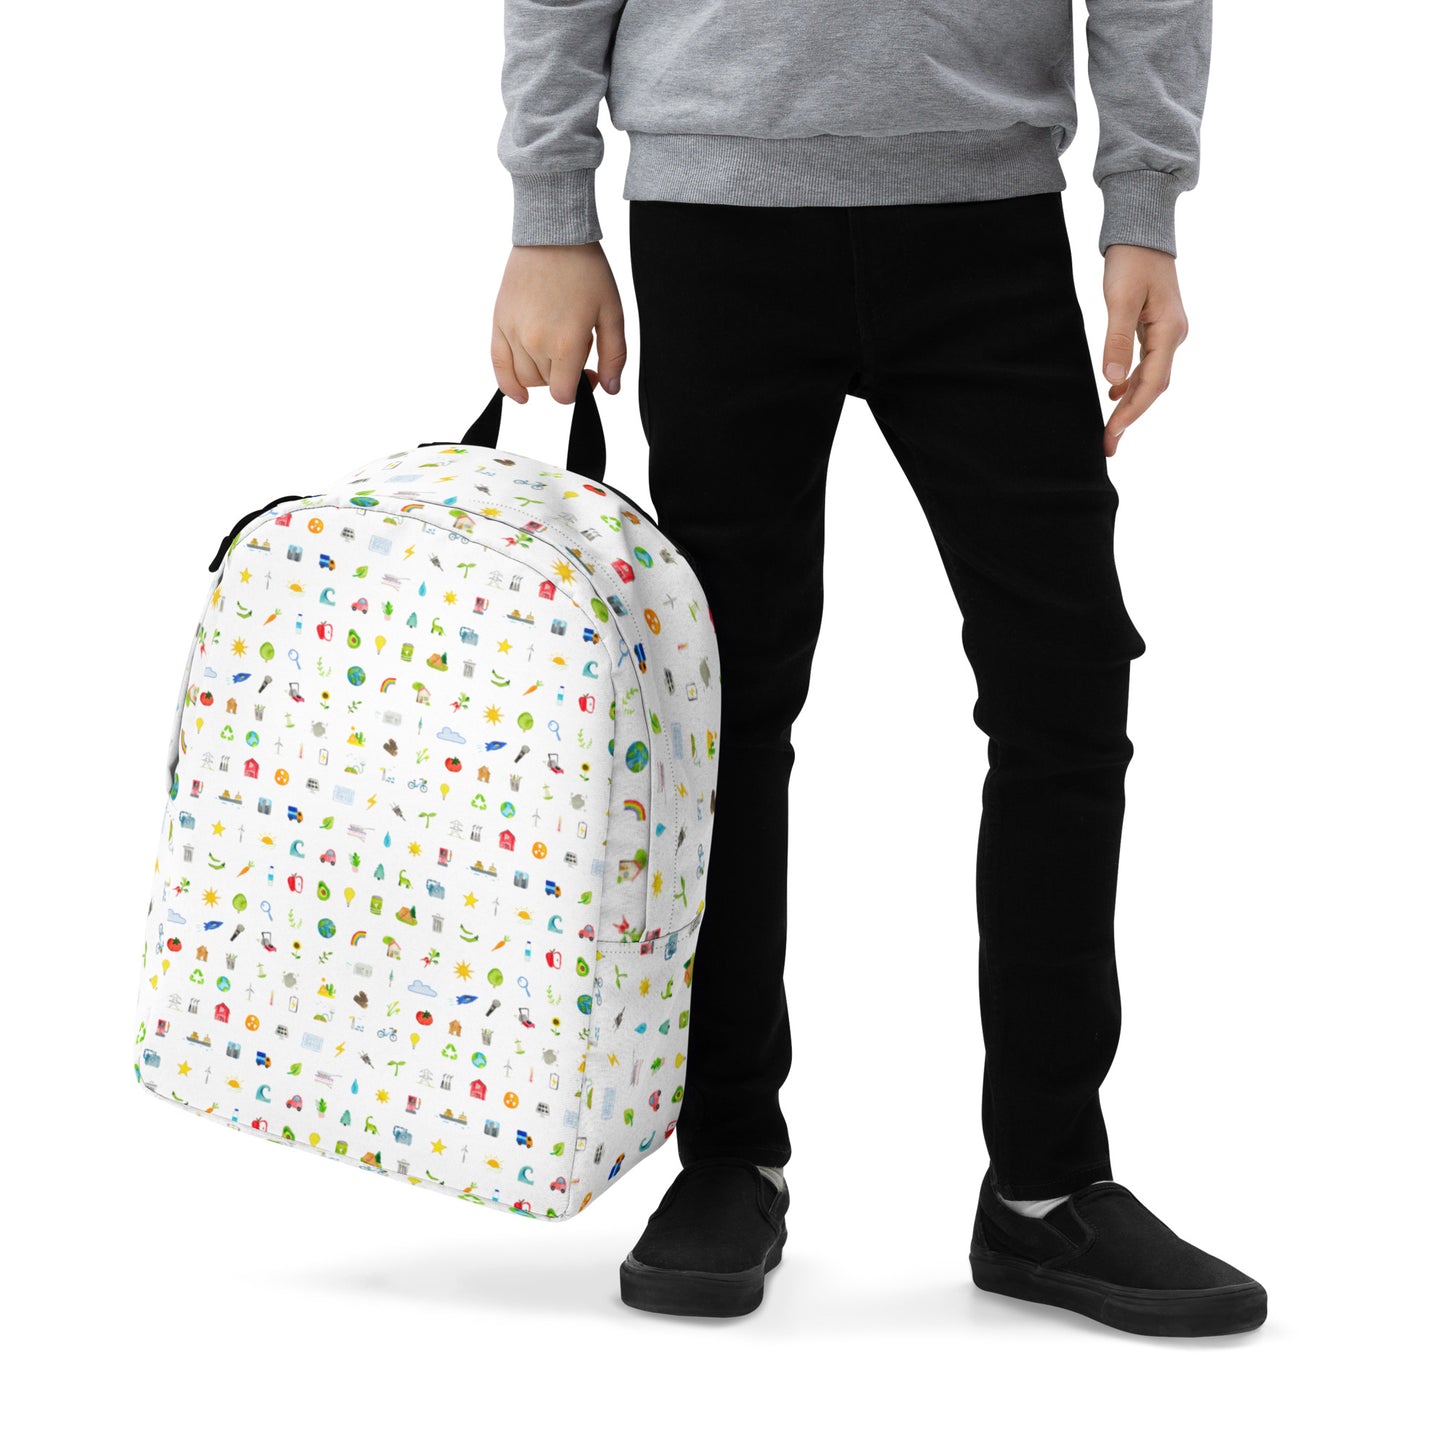 Climate Icons Backpack